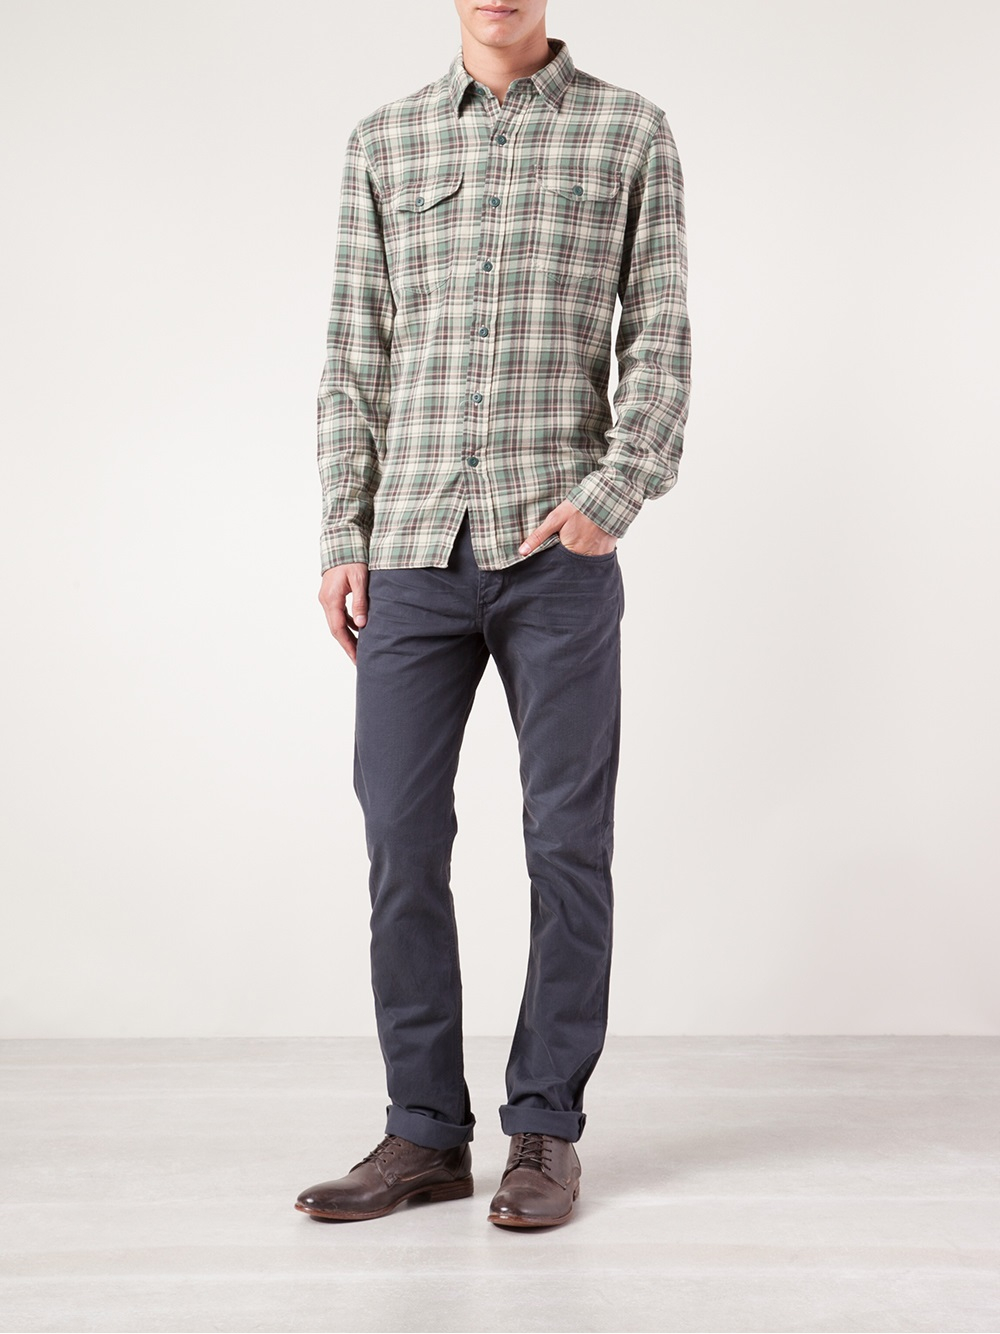 Lyst - RRL Plaid Flannel Shirt in Green for Men